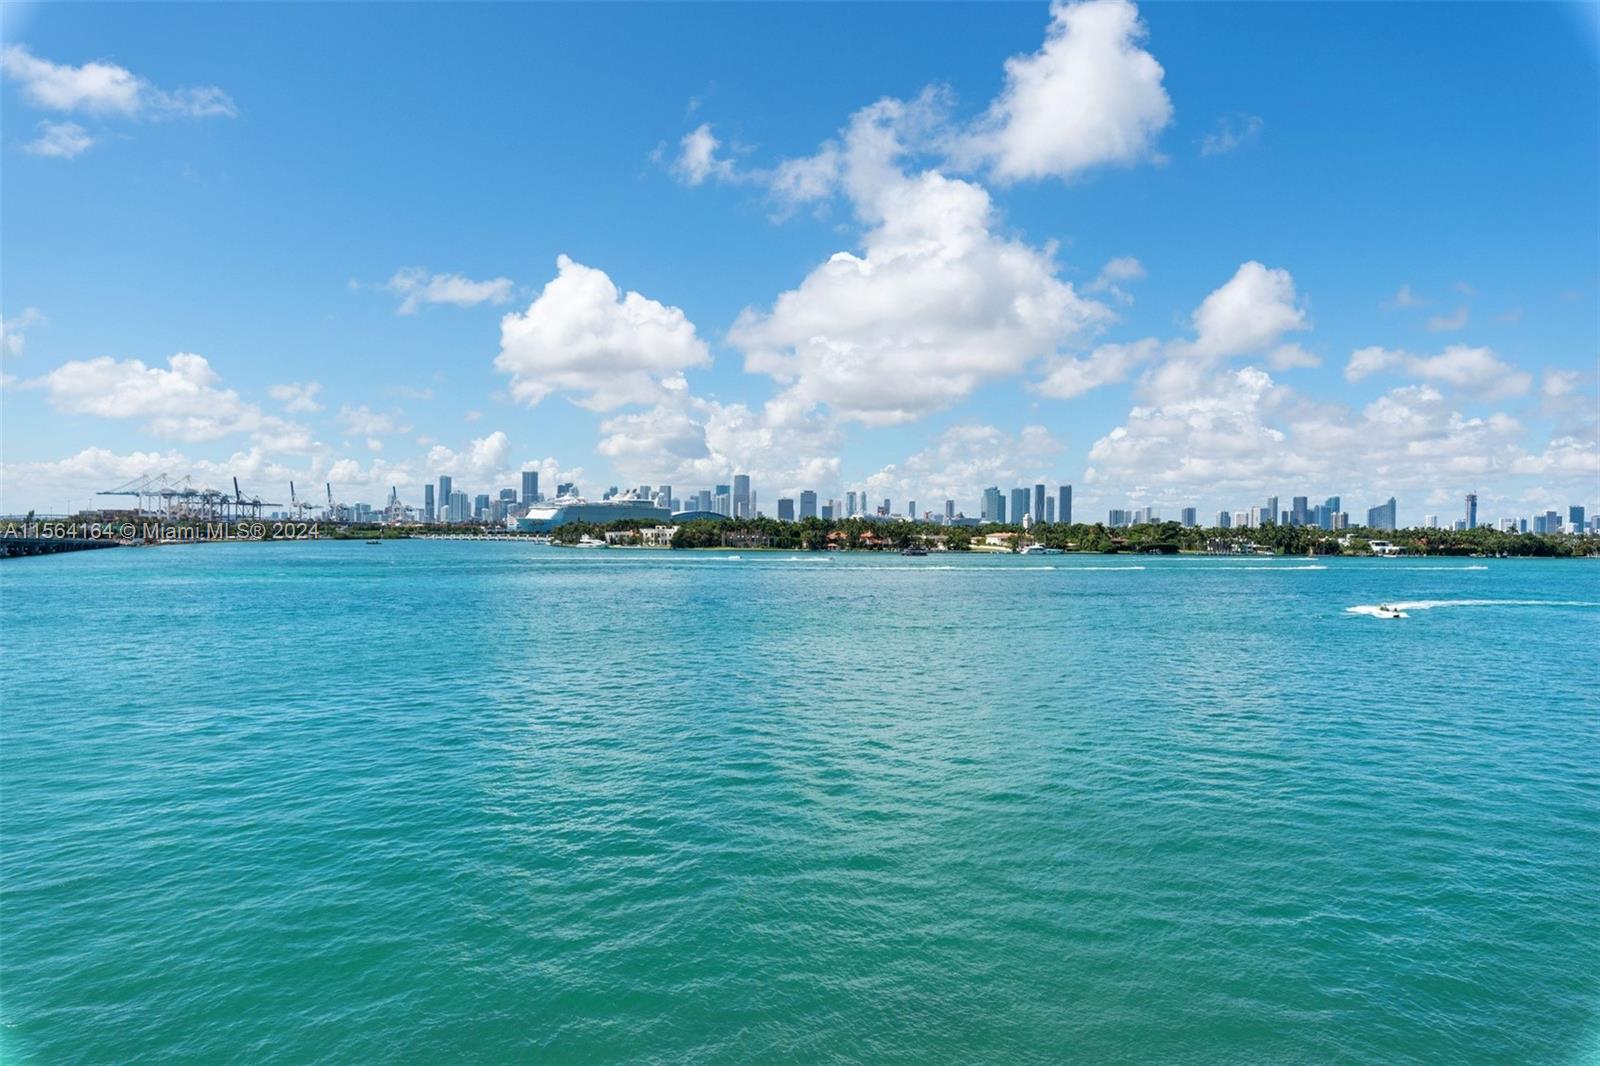 The Bentley Bay sits on the edge of Biscayne Bay with Star Island & cruise ship, unobstructed views of the water!! Located by Publix, I- 395 & walking path to be completed to take you SOFI soon, gorgeous completed park across the street. Completely renovated 1/1 fully furnished, clean & beachy unit with open wall from bedroom extend the views throughout. Italian kitchen, opens to dining room, X-Large bathroom with TUB and Shower, chandeliers and LED lighting. Spa, Steam, updated gym and POOL with views on the water. Available June 18th for one year